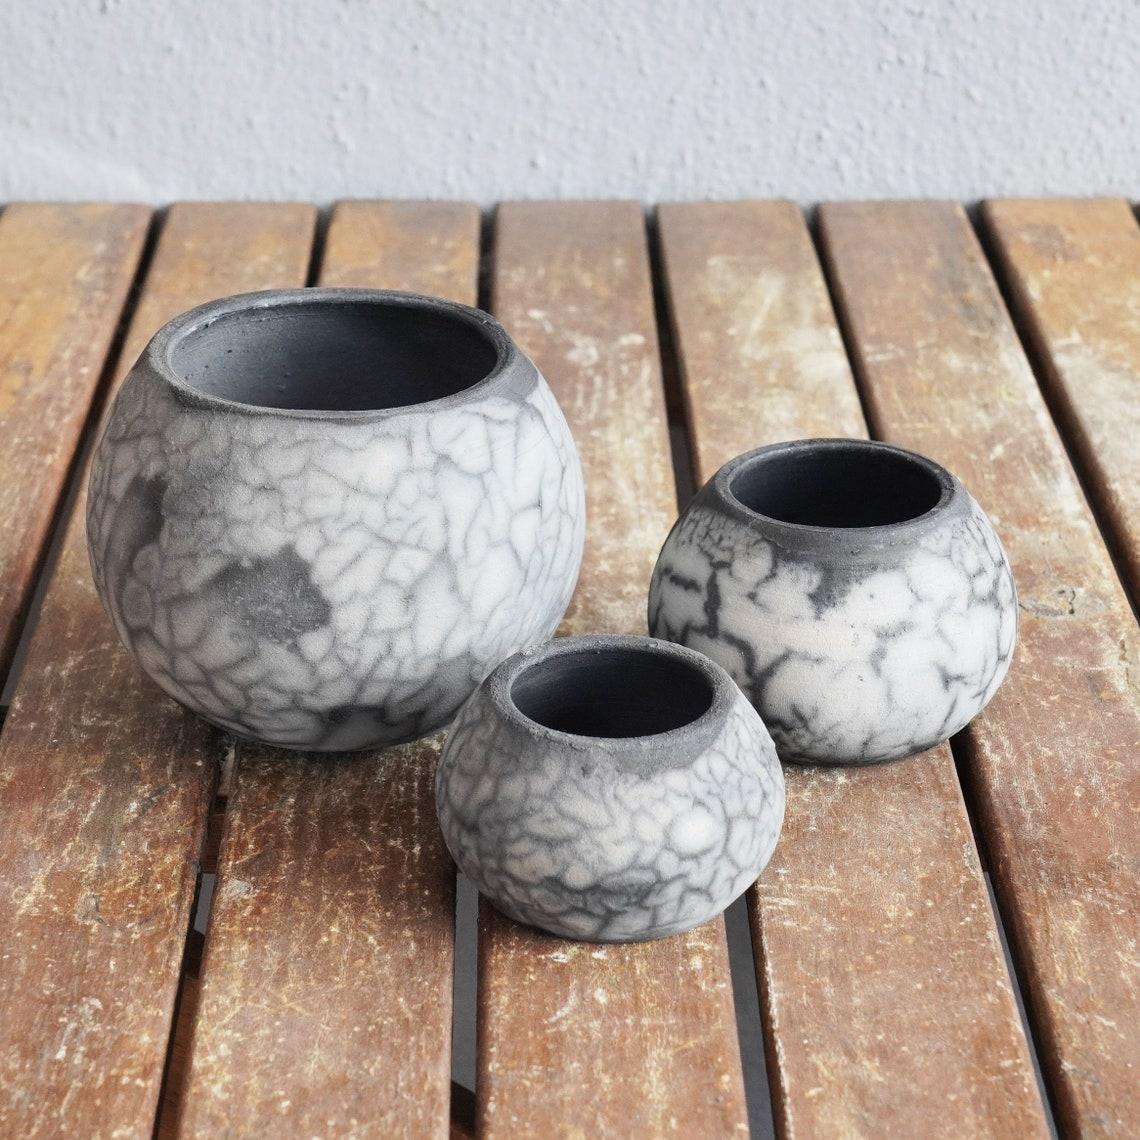 Tsuchi - Earth

*Plants are not included in this purchase

Our Tsuchi pot is named after the medium it holds ; Earth. This pot is double sealed to prevent moisture from seeping into the ceramic and created with up to 3 holes at the bottom for water